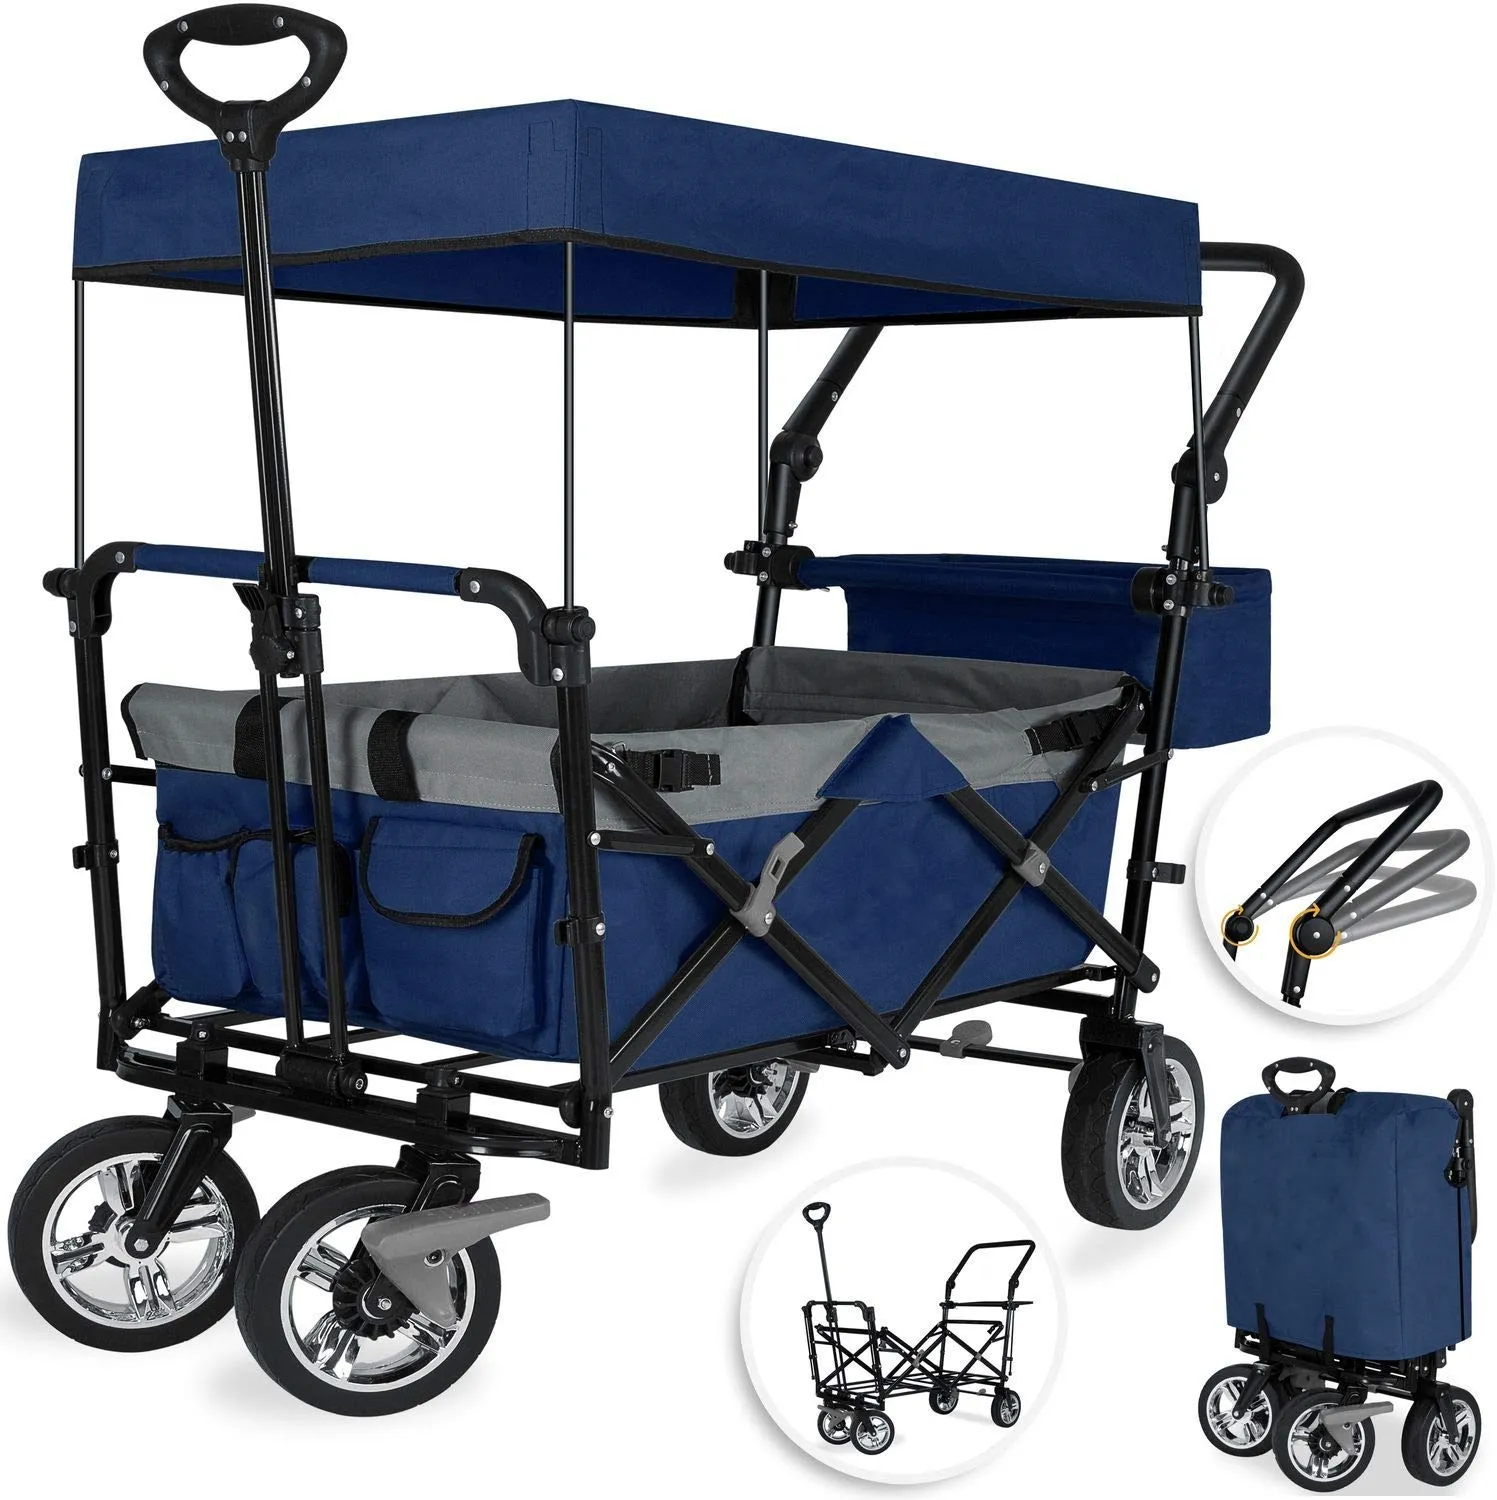 North American Quality Kids Stroller Collapsible Utility Wagon With 600D Fabric And Cotton